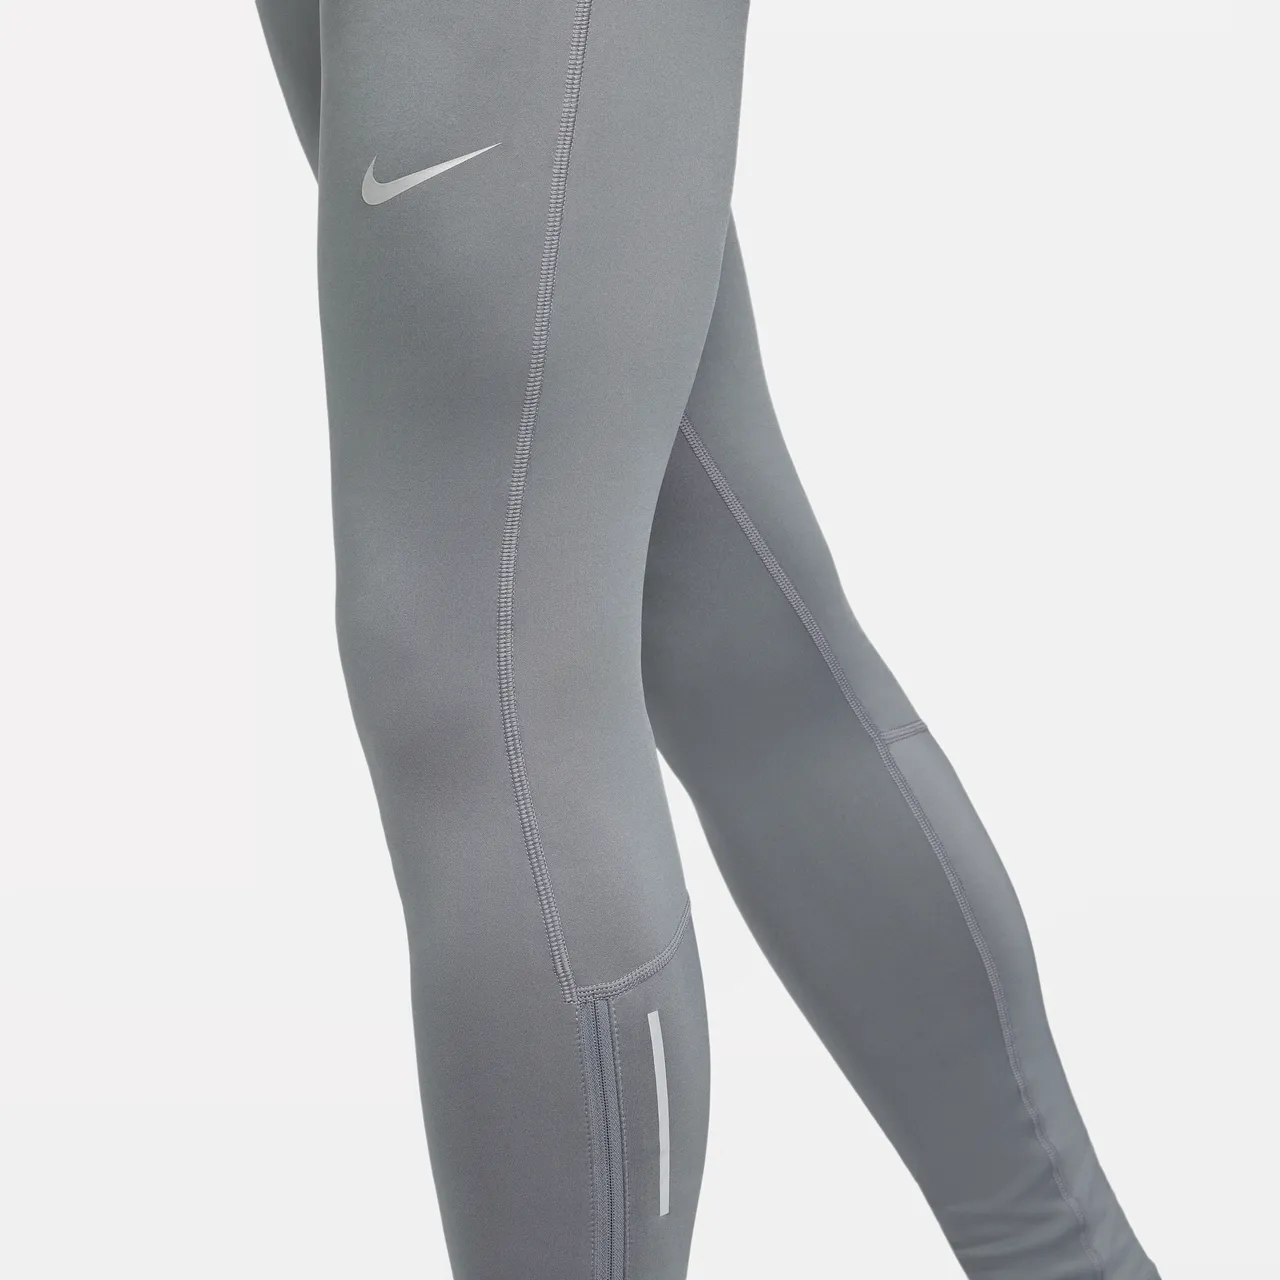 Nike Challenger Men's Dri-FIT Running Tights - Grey - Polyester